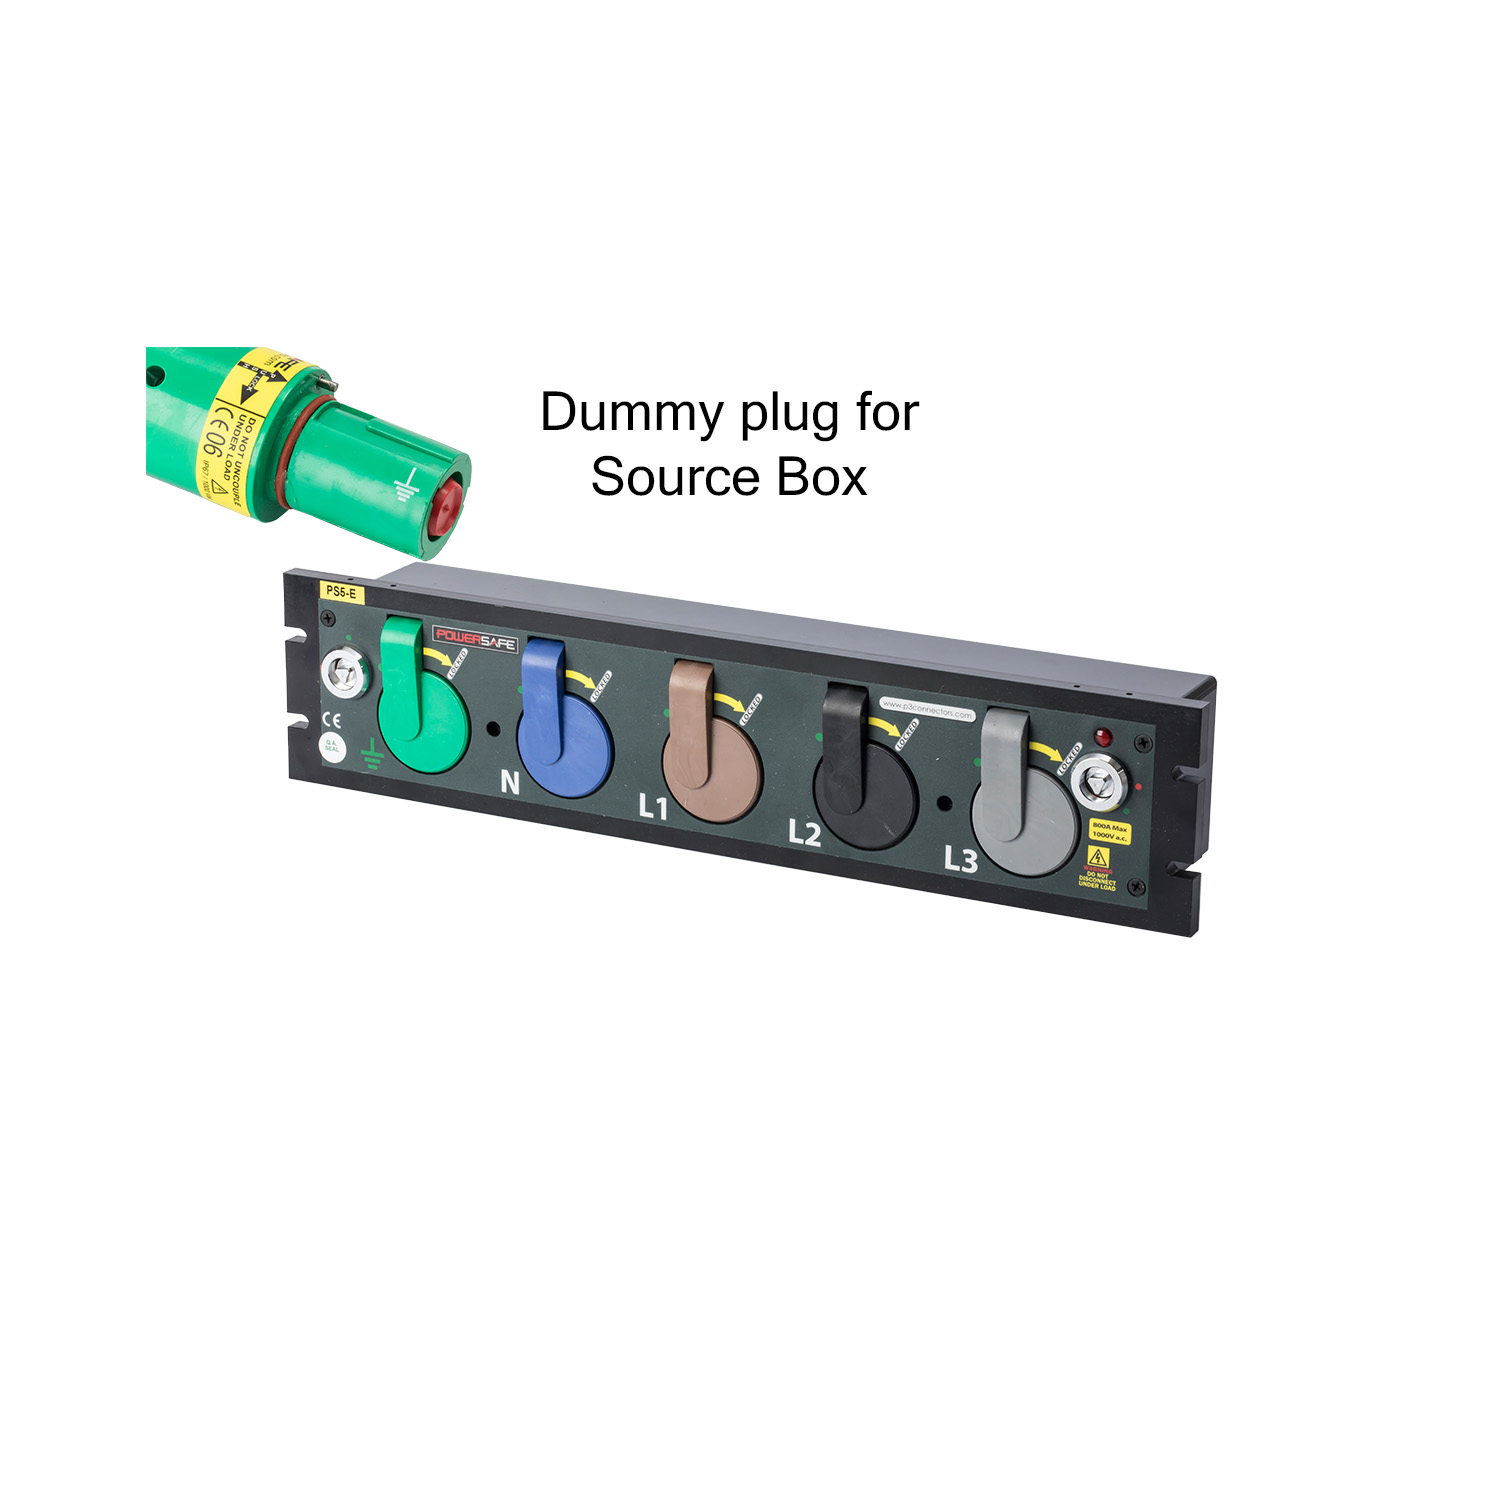 P3 SOURCE BOX Dummy PLUG E-GN to use Sequential box without Earth lead